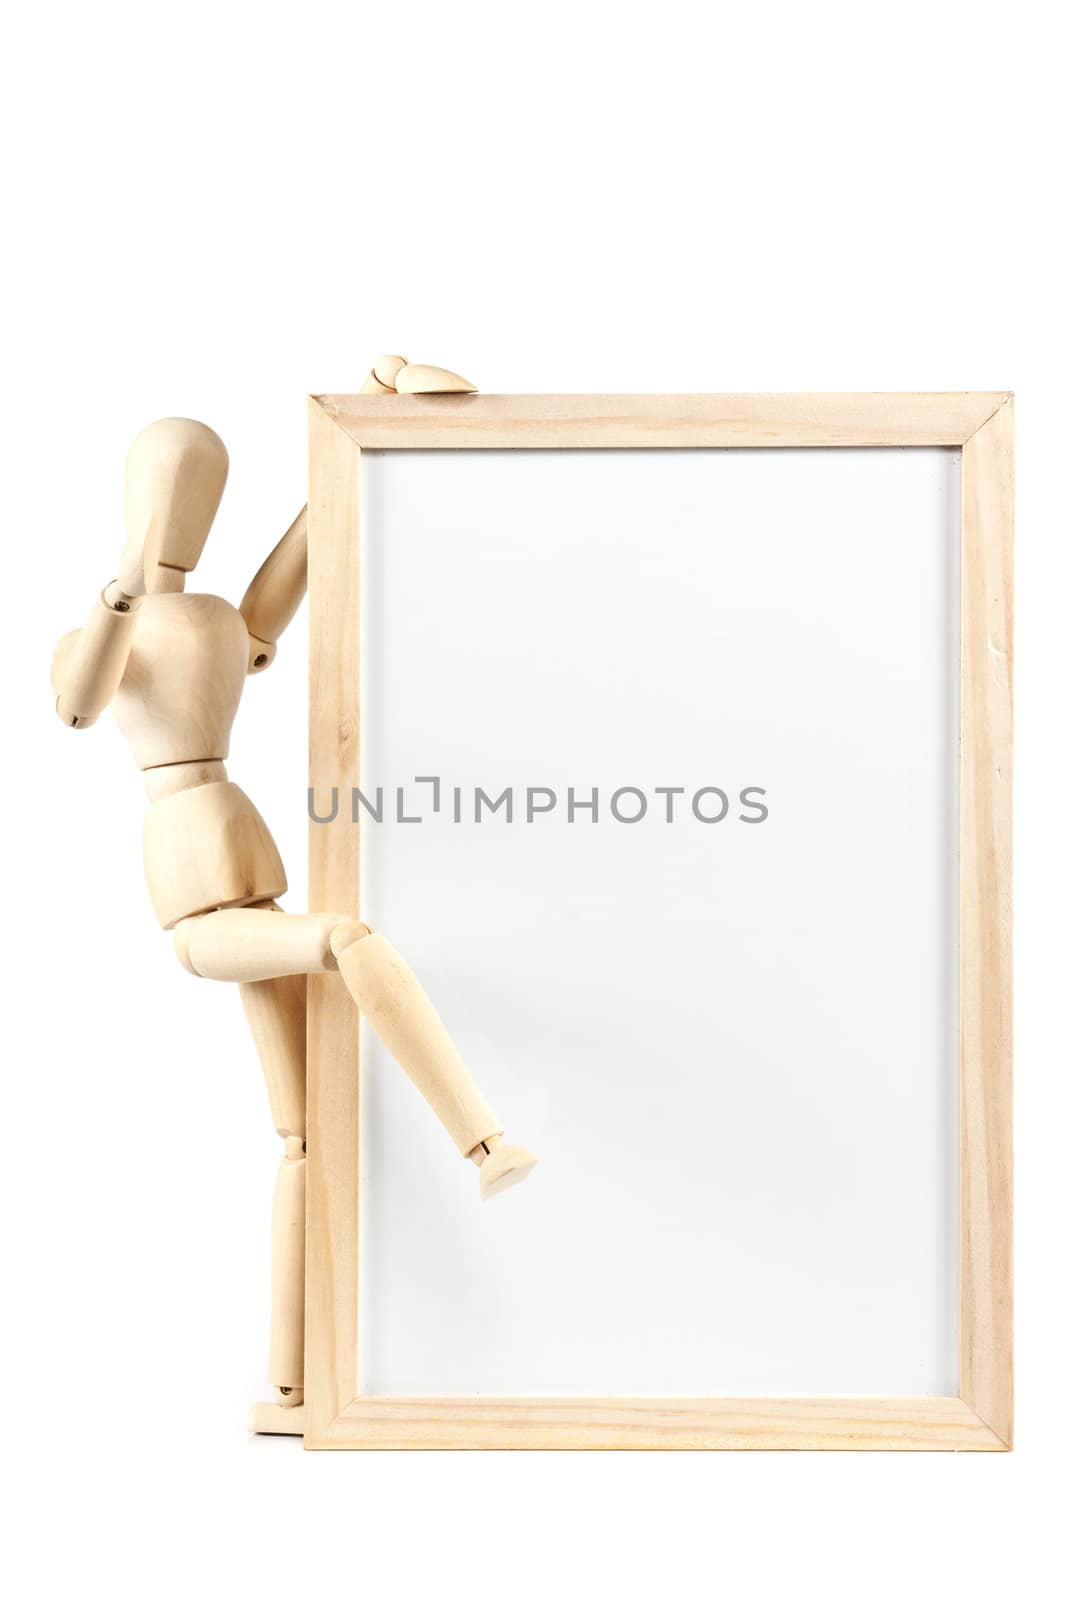 Mannequin and blank whiteboard message on white background